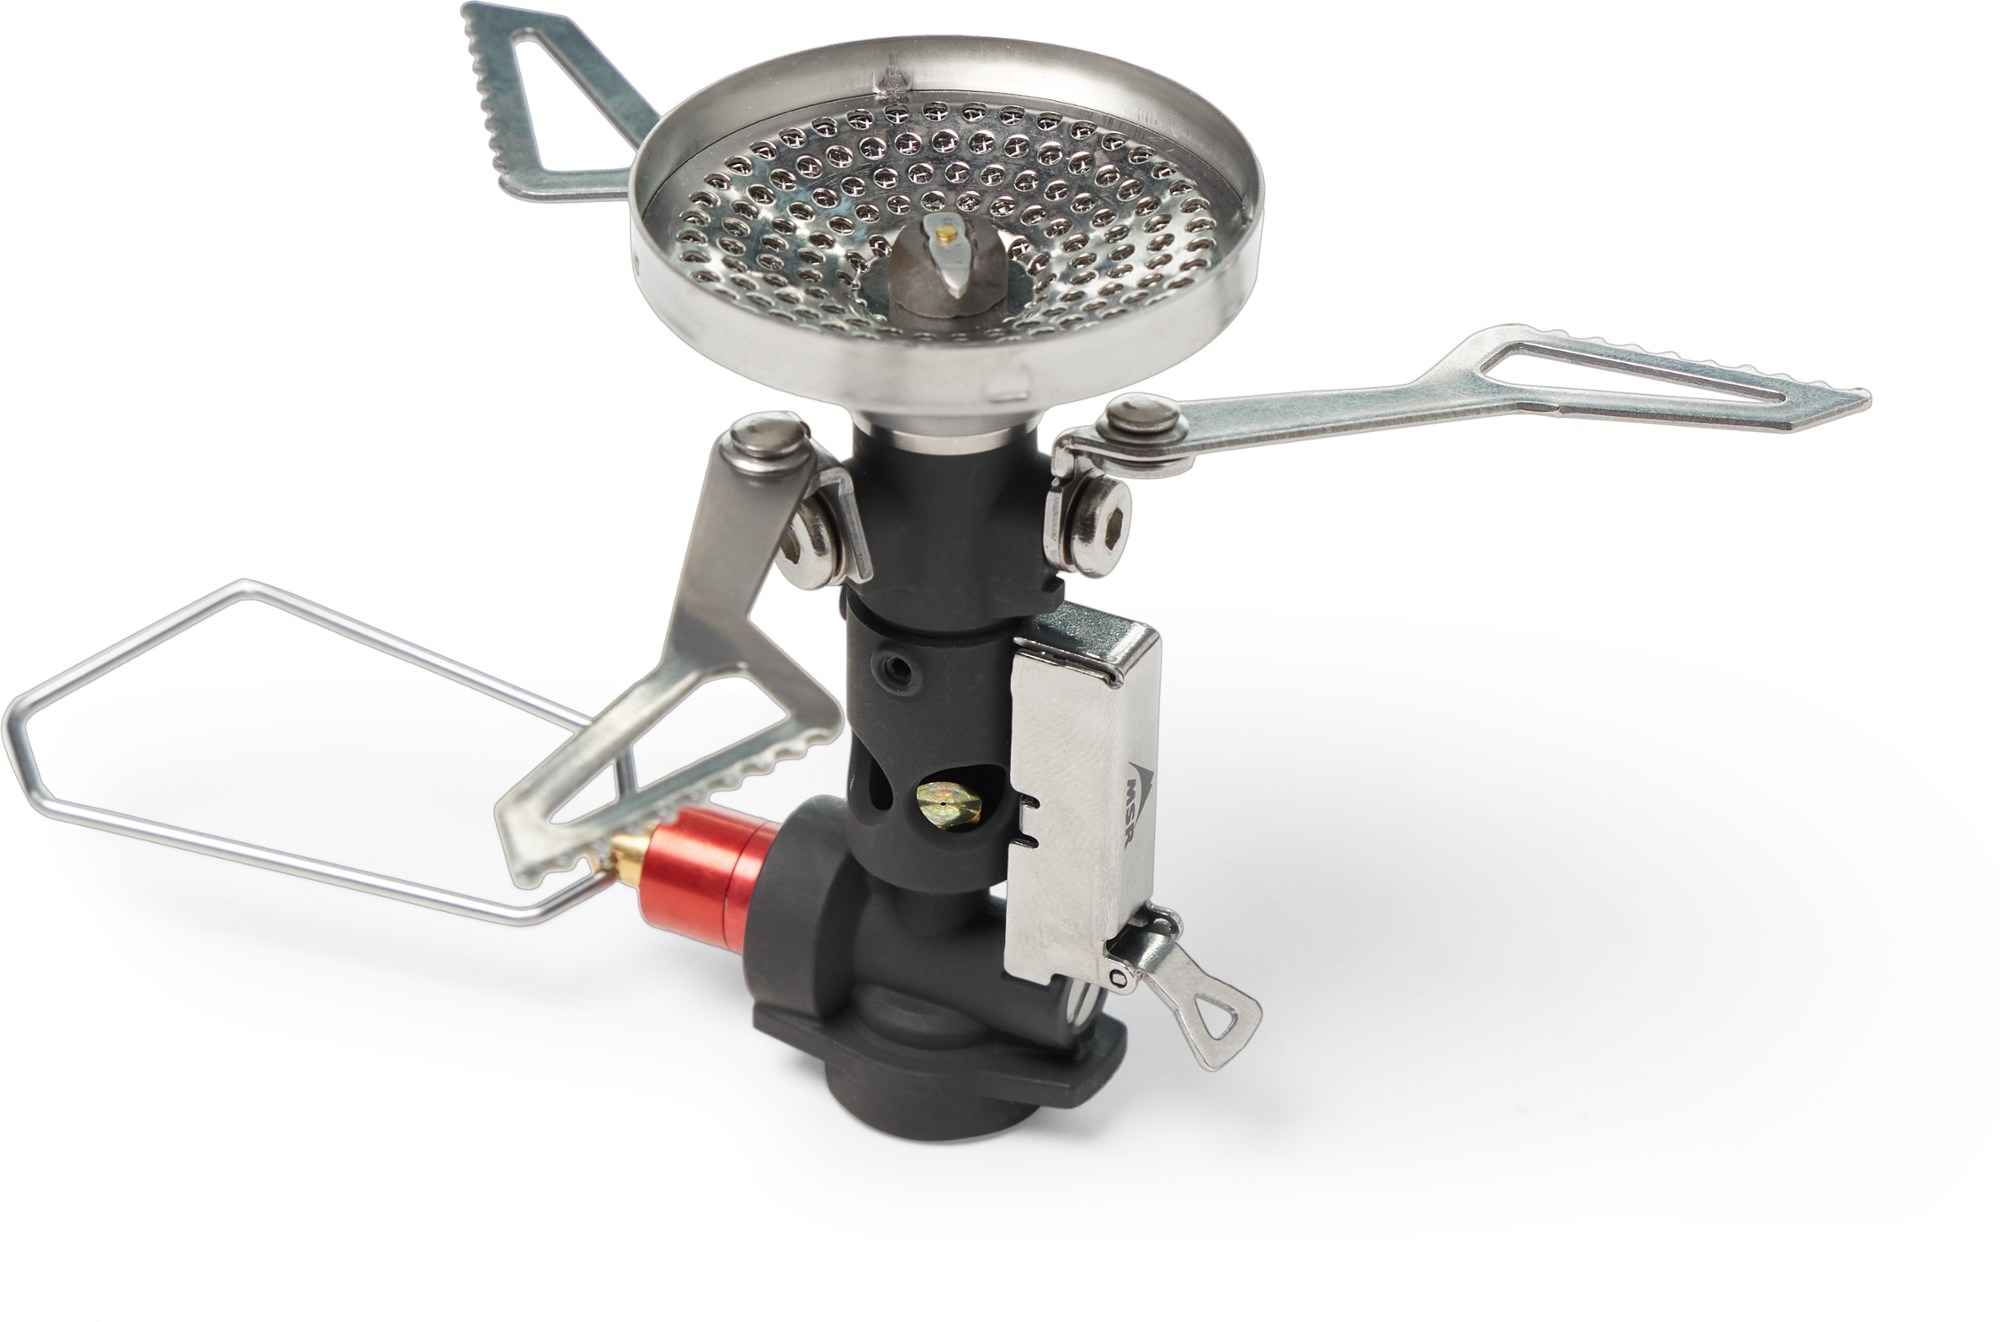 Best Overall Backpacking Stove